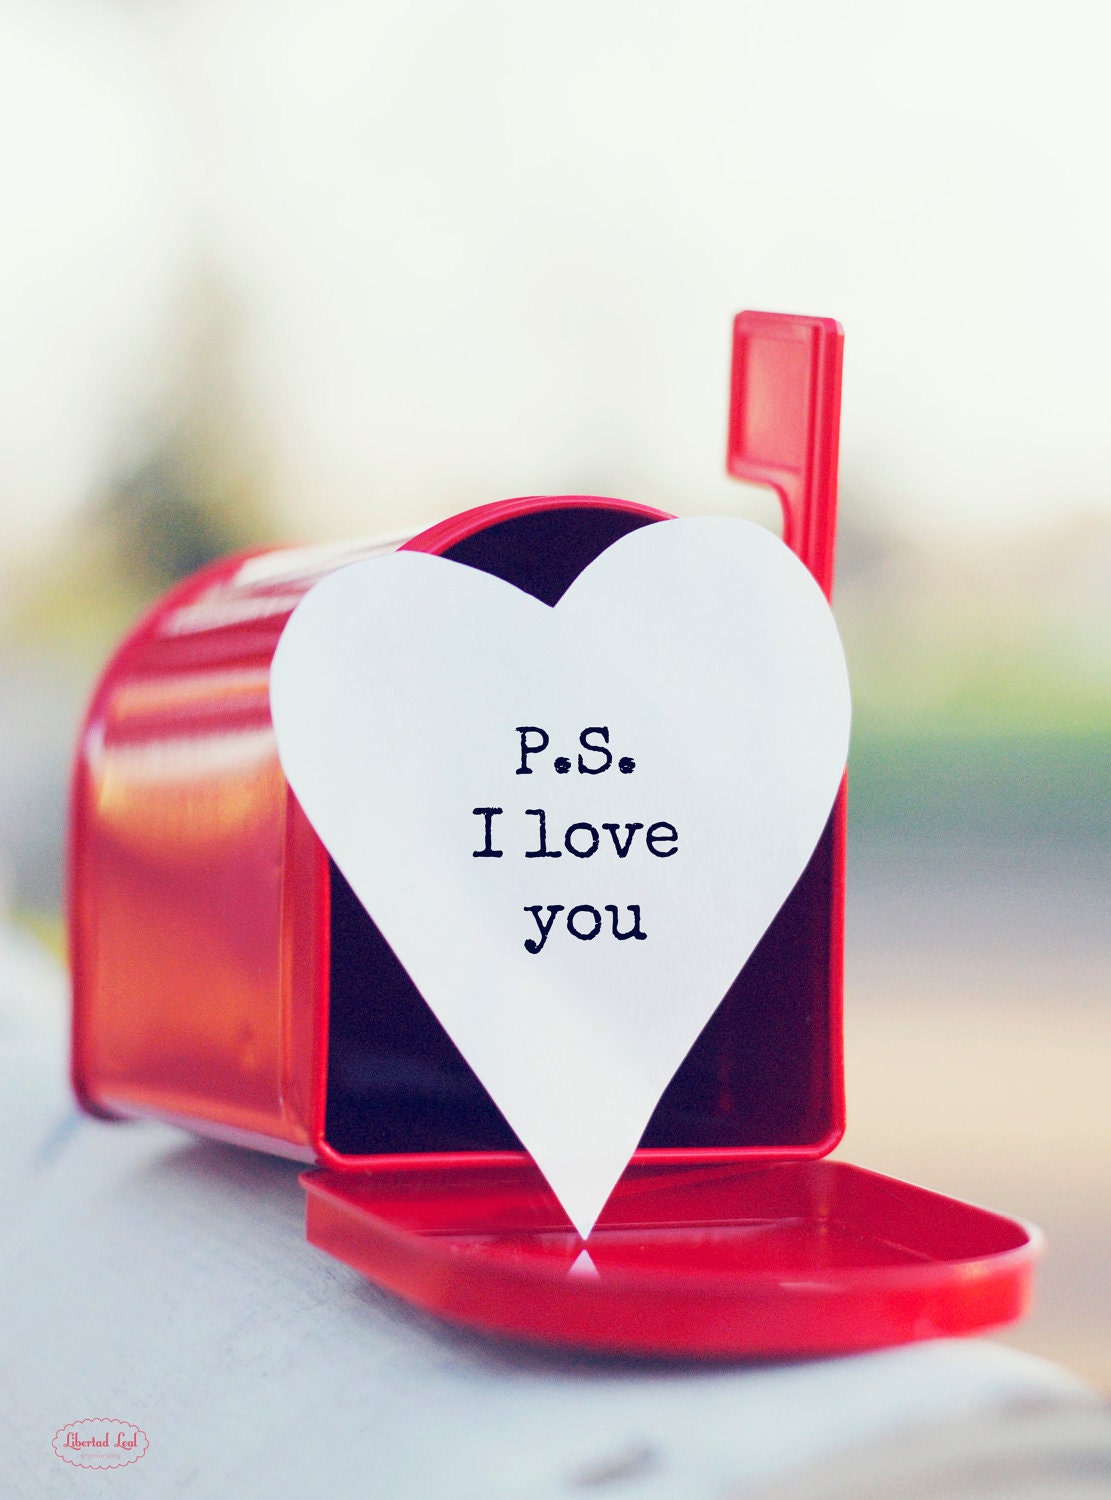 Fine Art Photography - red love heart valentines day photo print mailbox P.S I love you 8x10  wall art - libertadleal